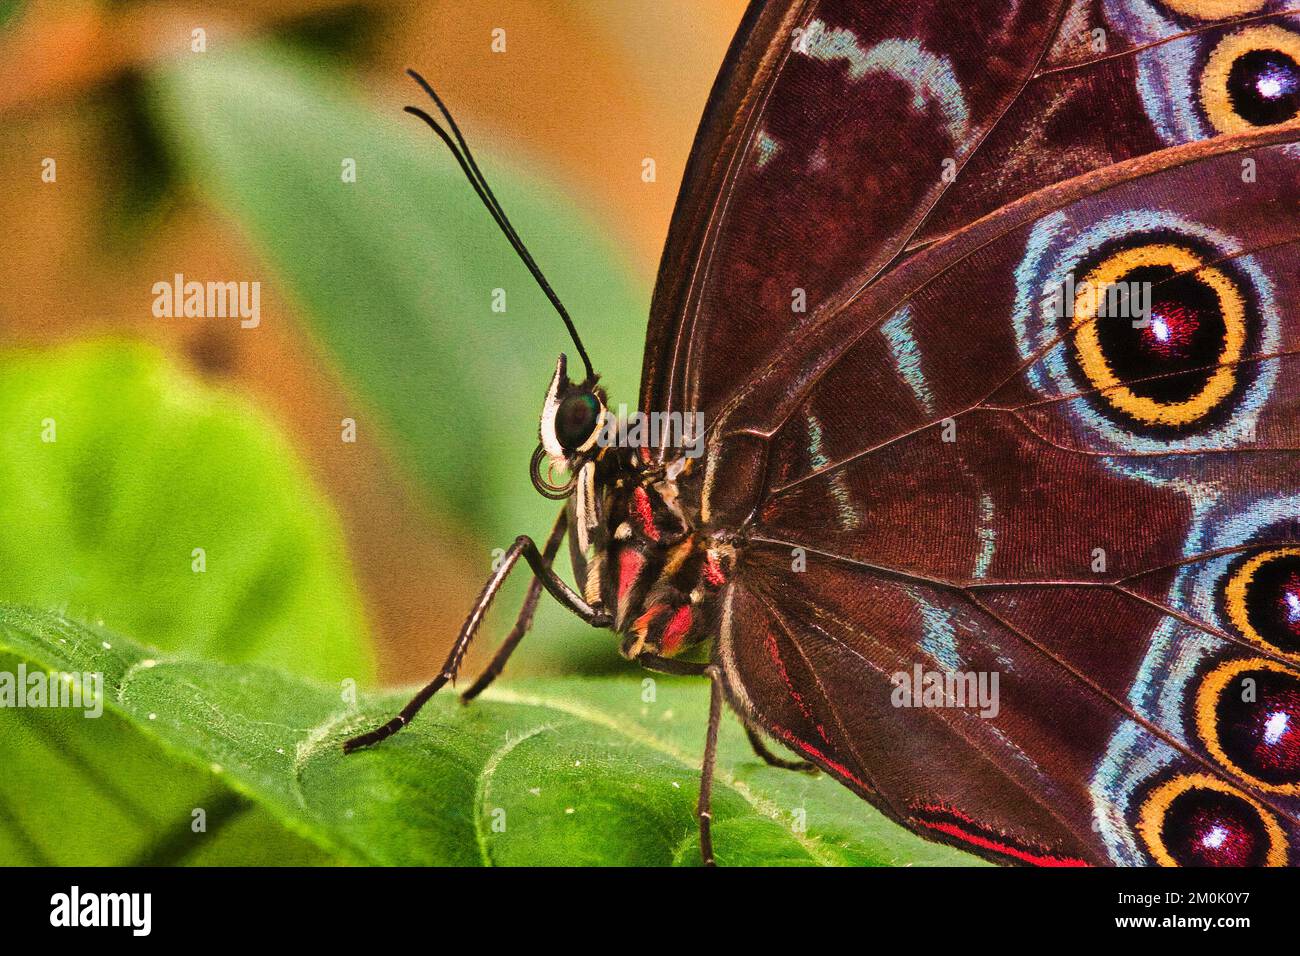 super closeup of a brown butterfly with detailed markings Stock Photo